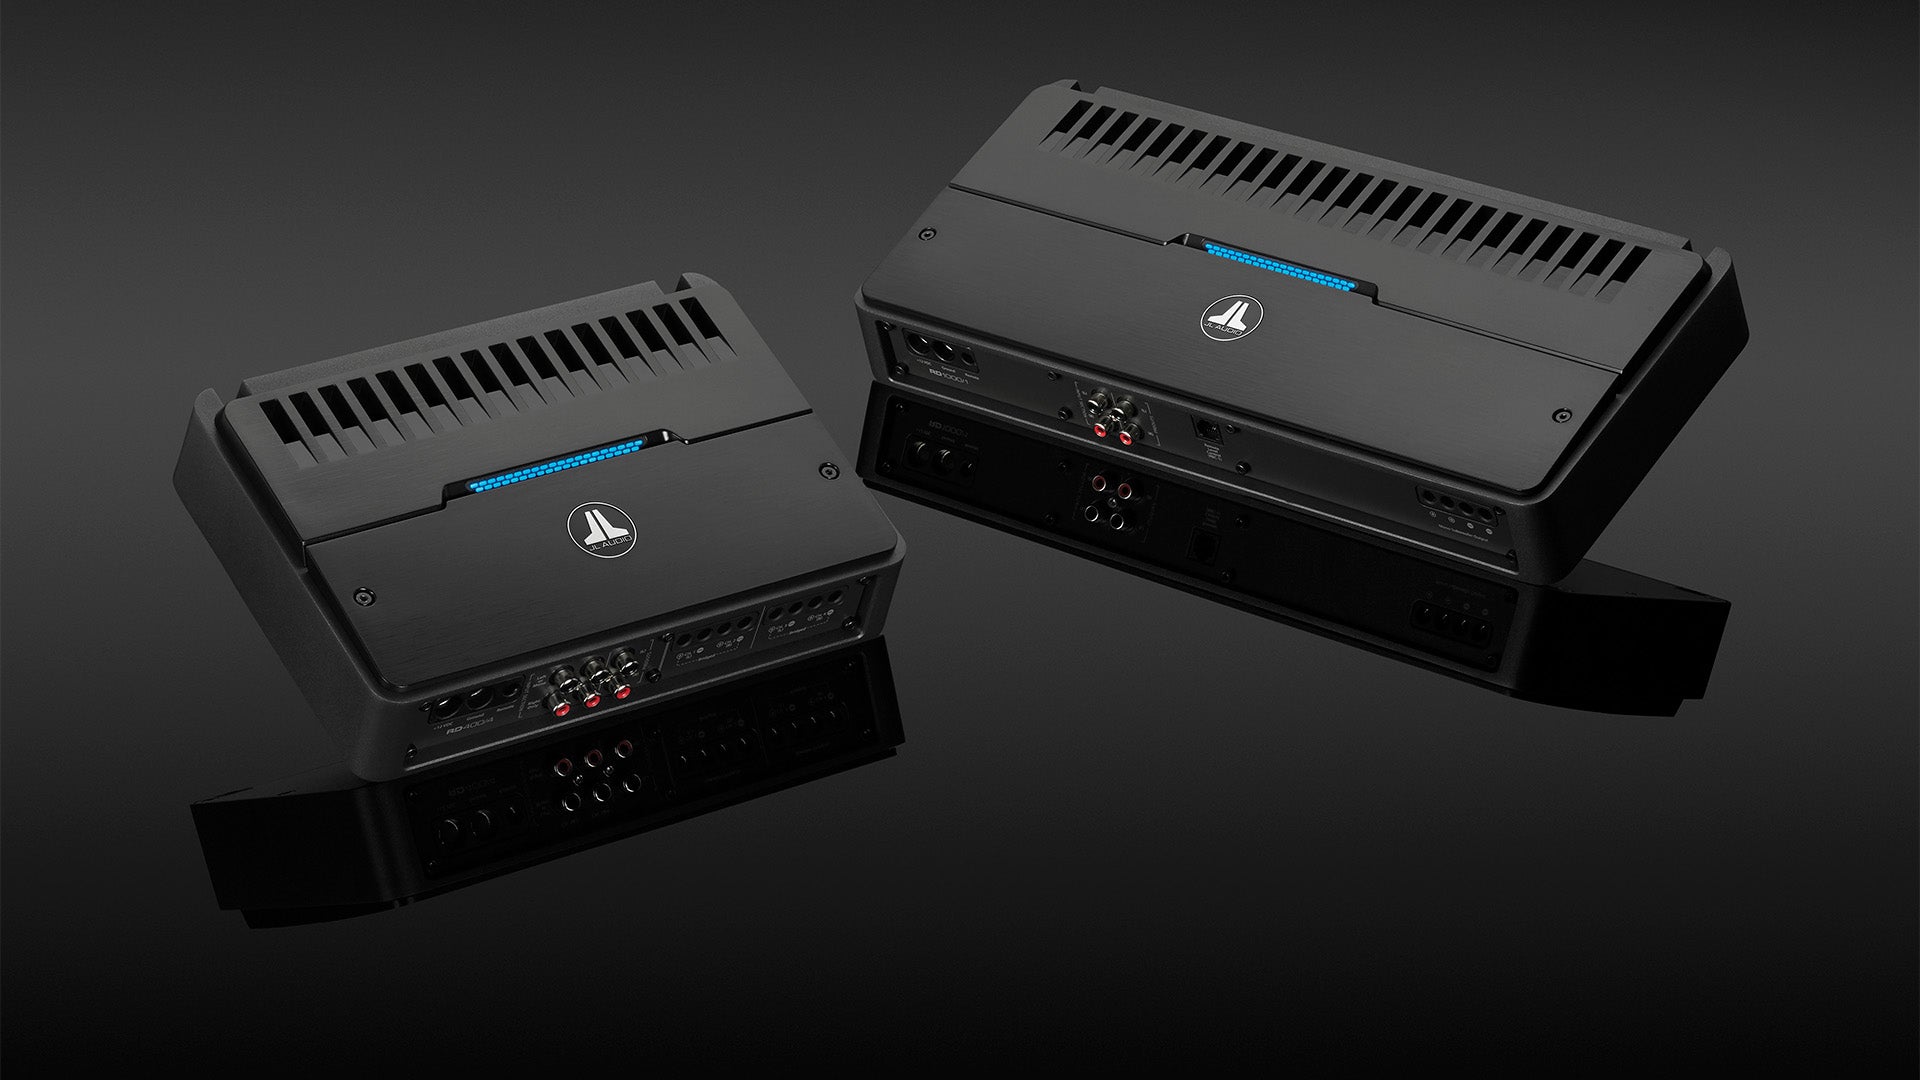 A pair of RD amplifiers on a sleek reflective dark surface.